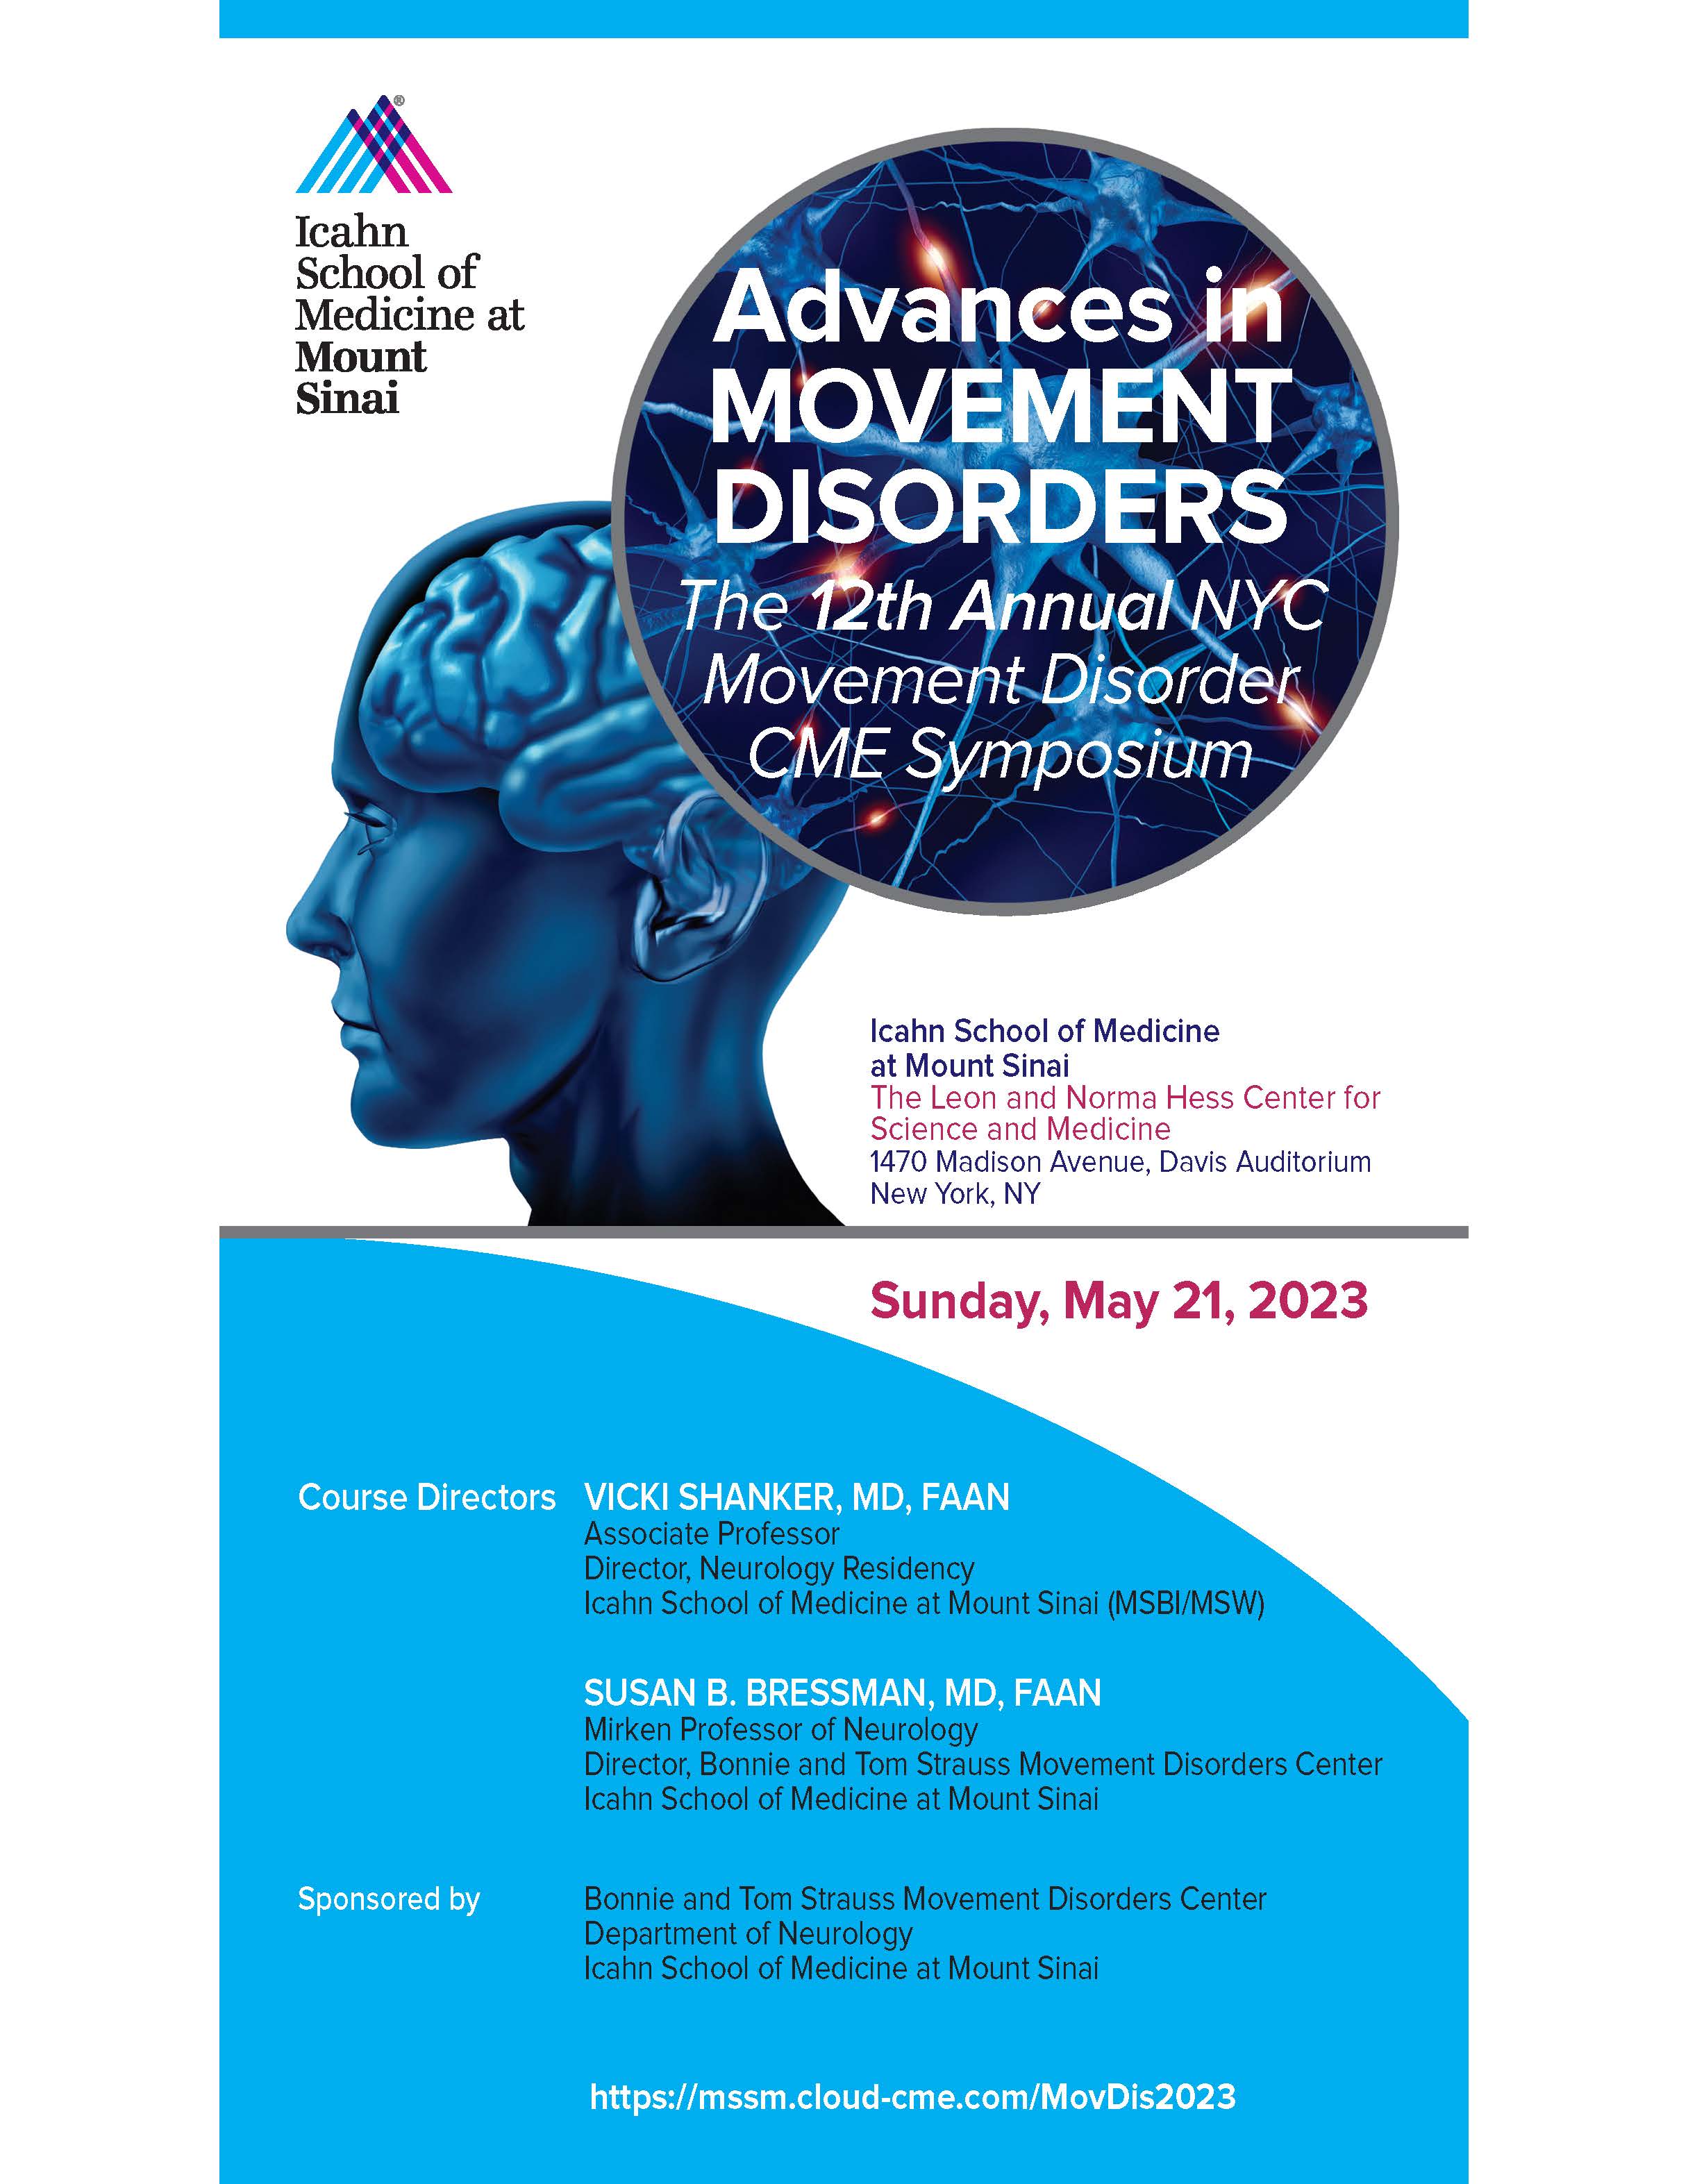 Advances in Movement Disorders: The 12th Annual NYC Movement Disorder CME Symposium Banner